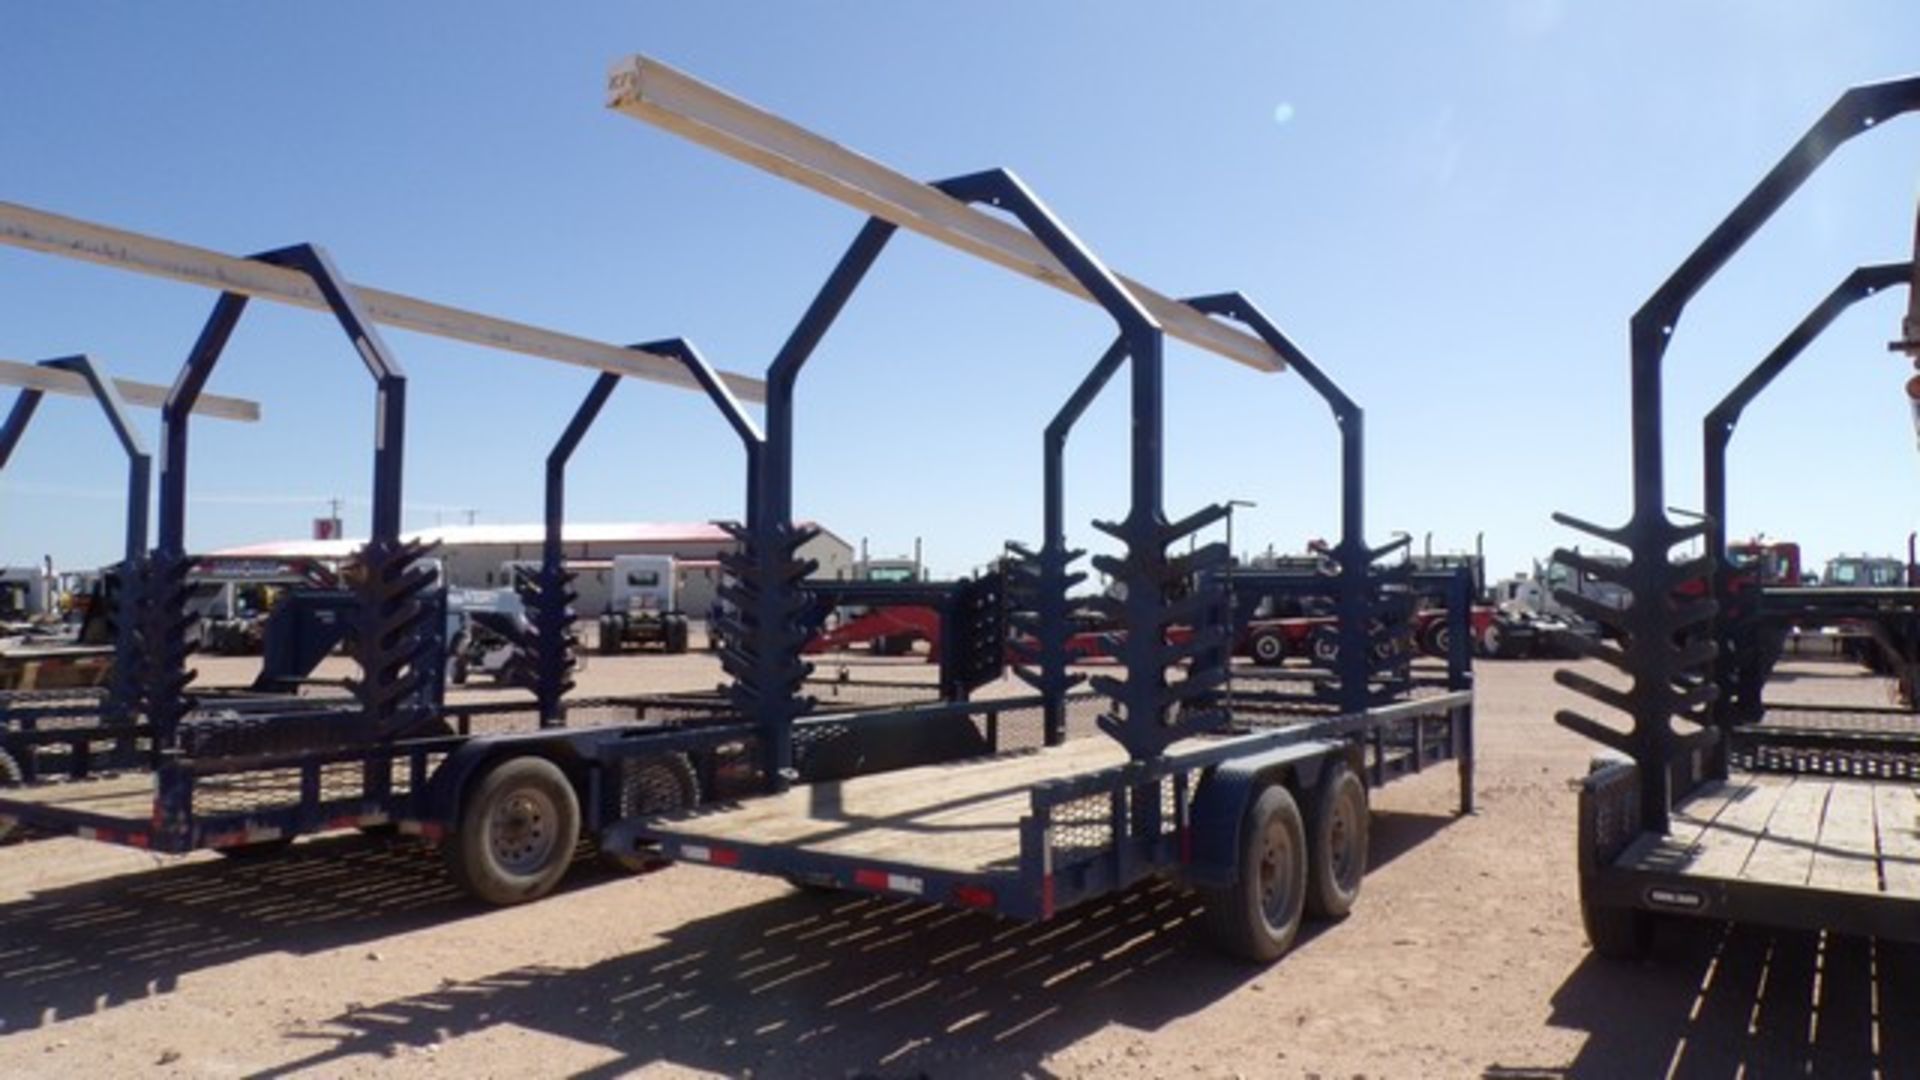 Located in YARD 1 - Midland, TX (P5047) (2358) (X) 2019 PULL DO T/A COMBO MONORAIL/ TOOL TRAILER, - Image 4 of 4